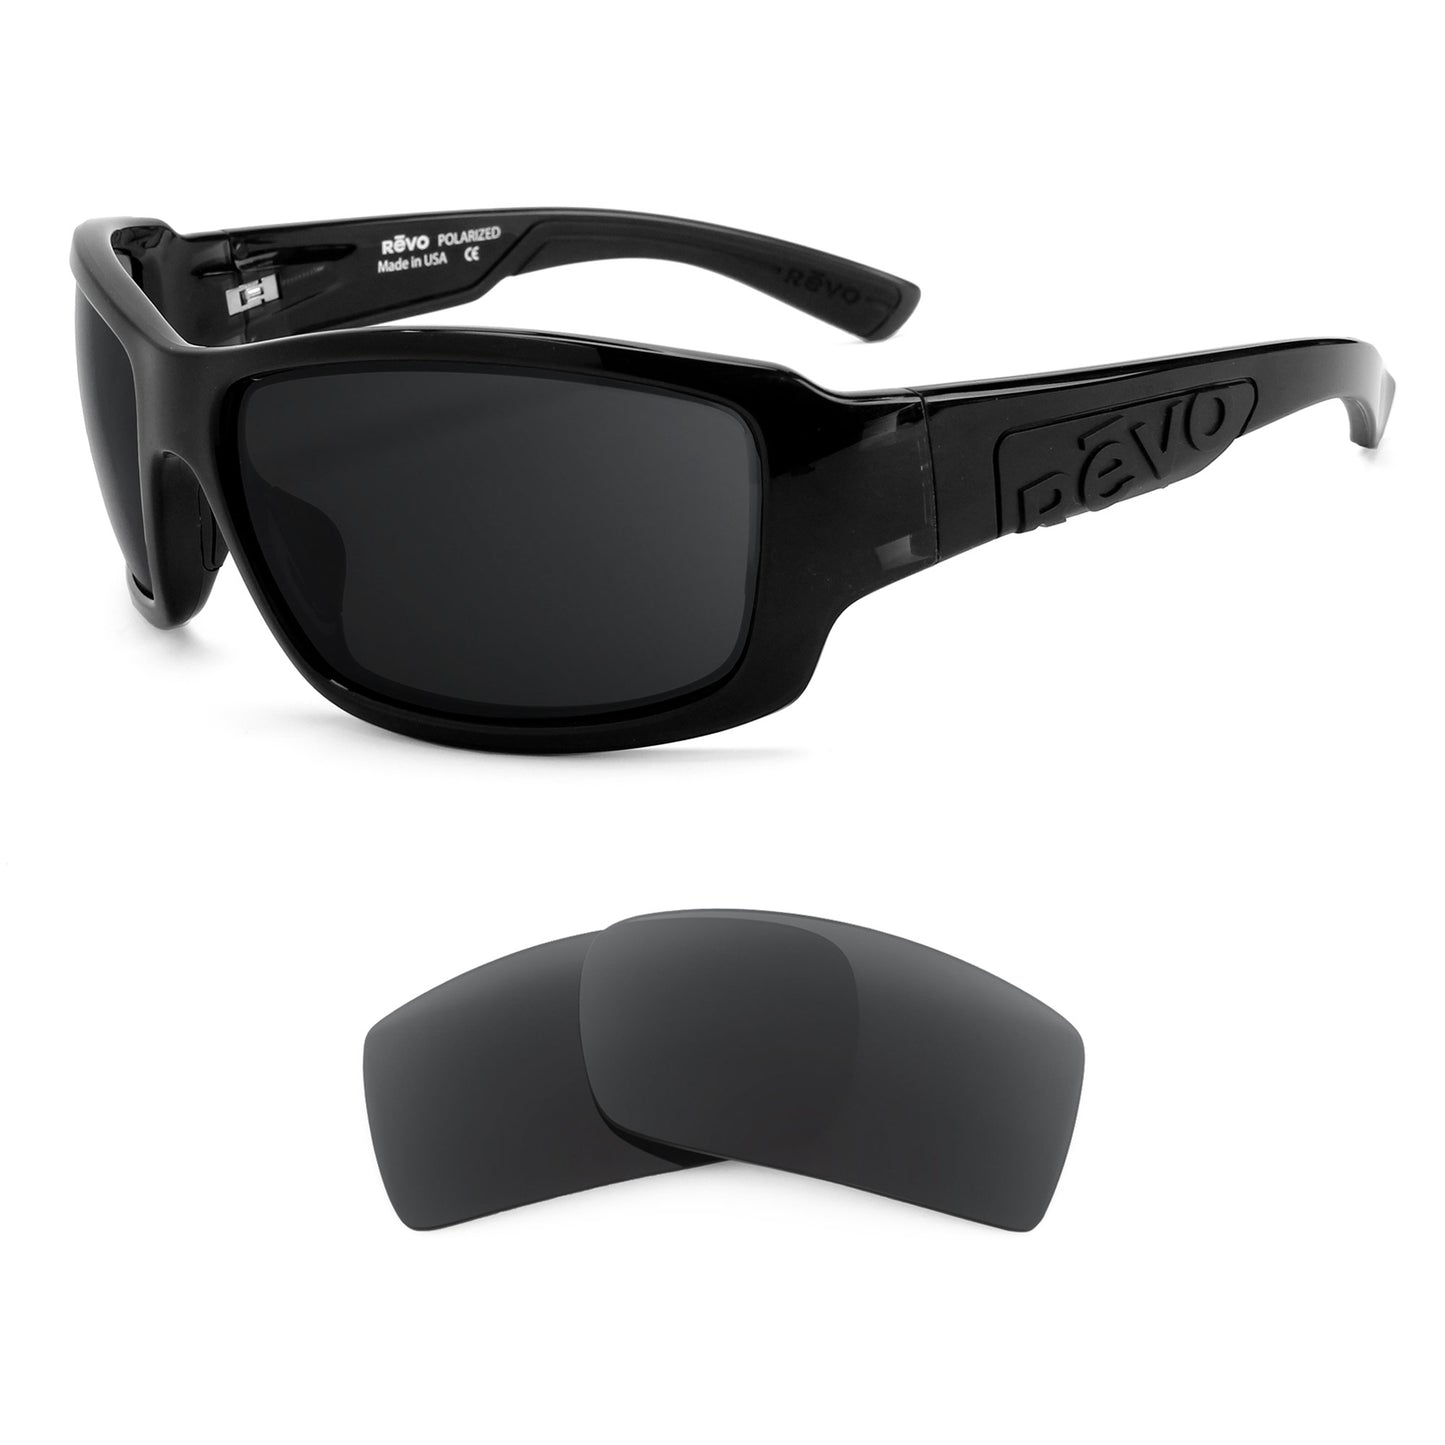 Revo Straightshot RE1005 sunglasses with replacement lenses